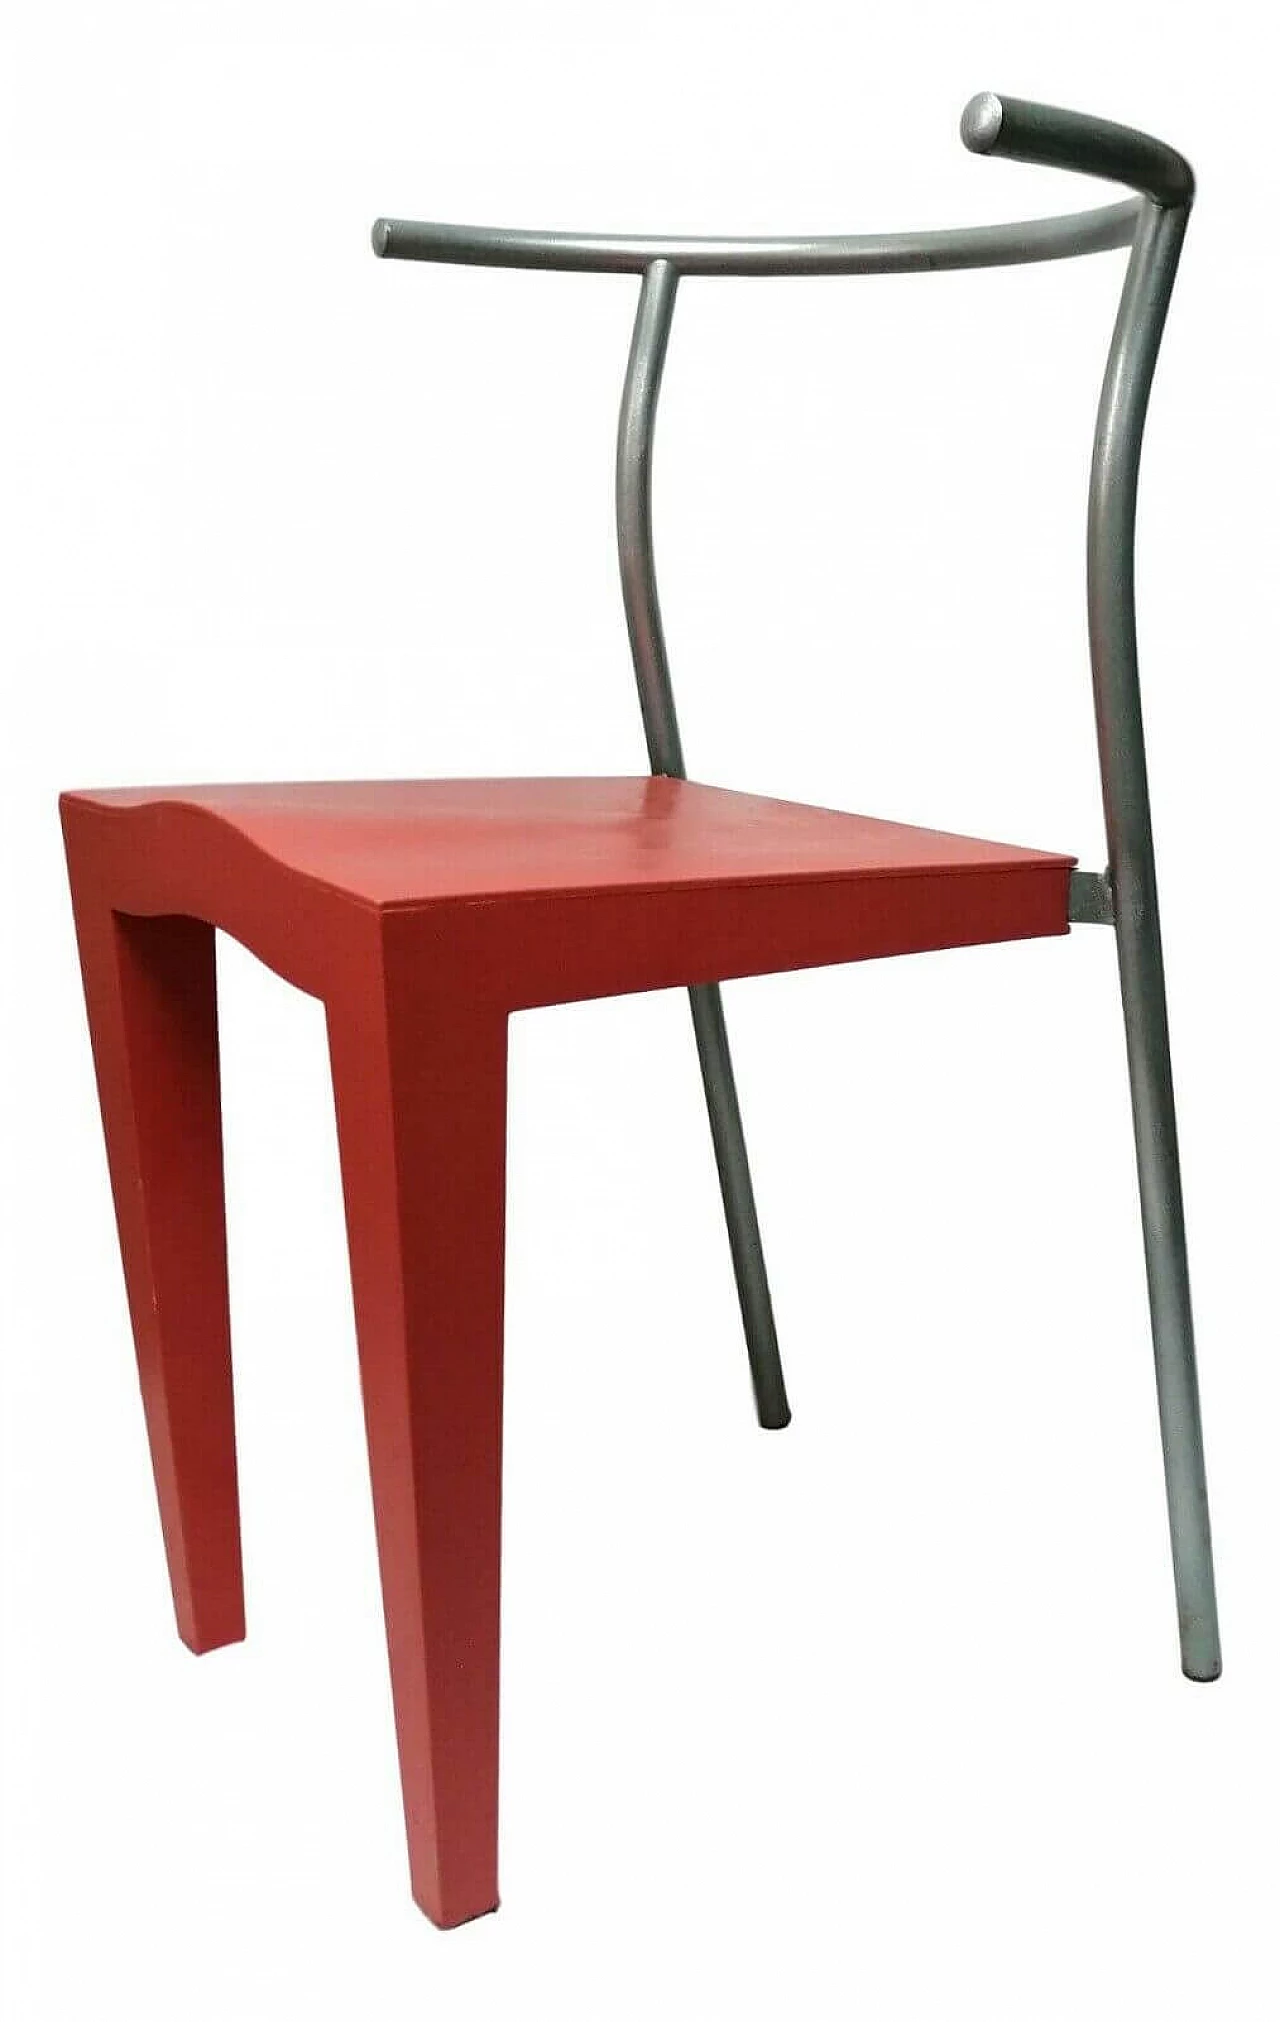 Dr Glob chair by Philippe Starck for Kartell, coral, 1990s 1164752